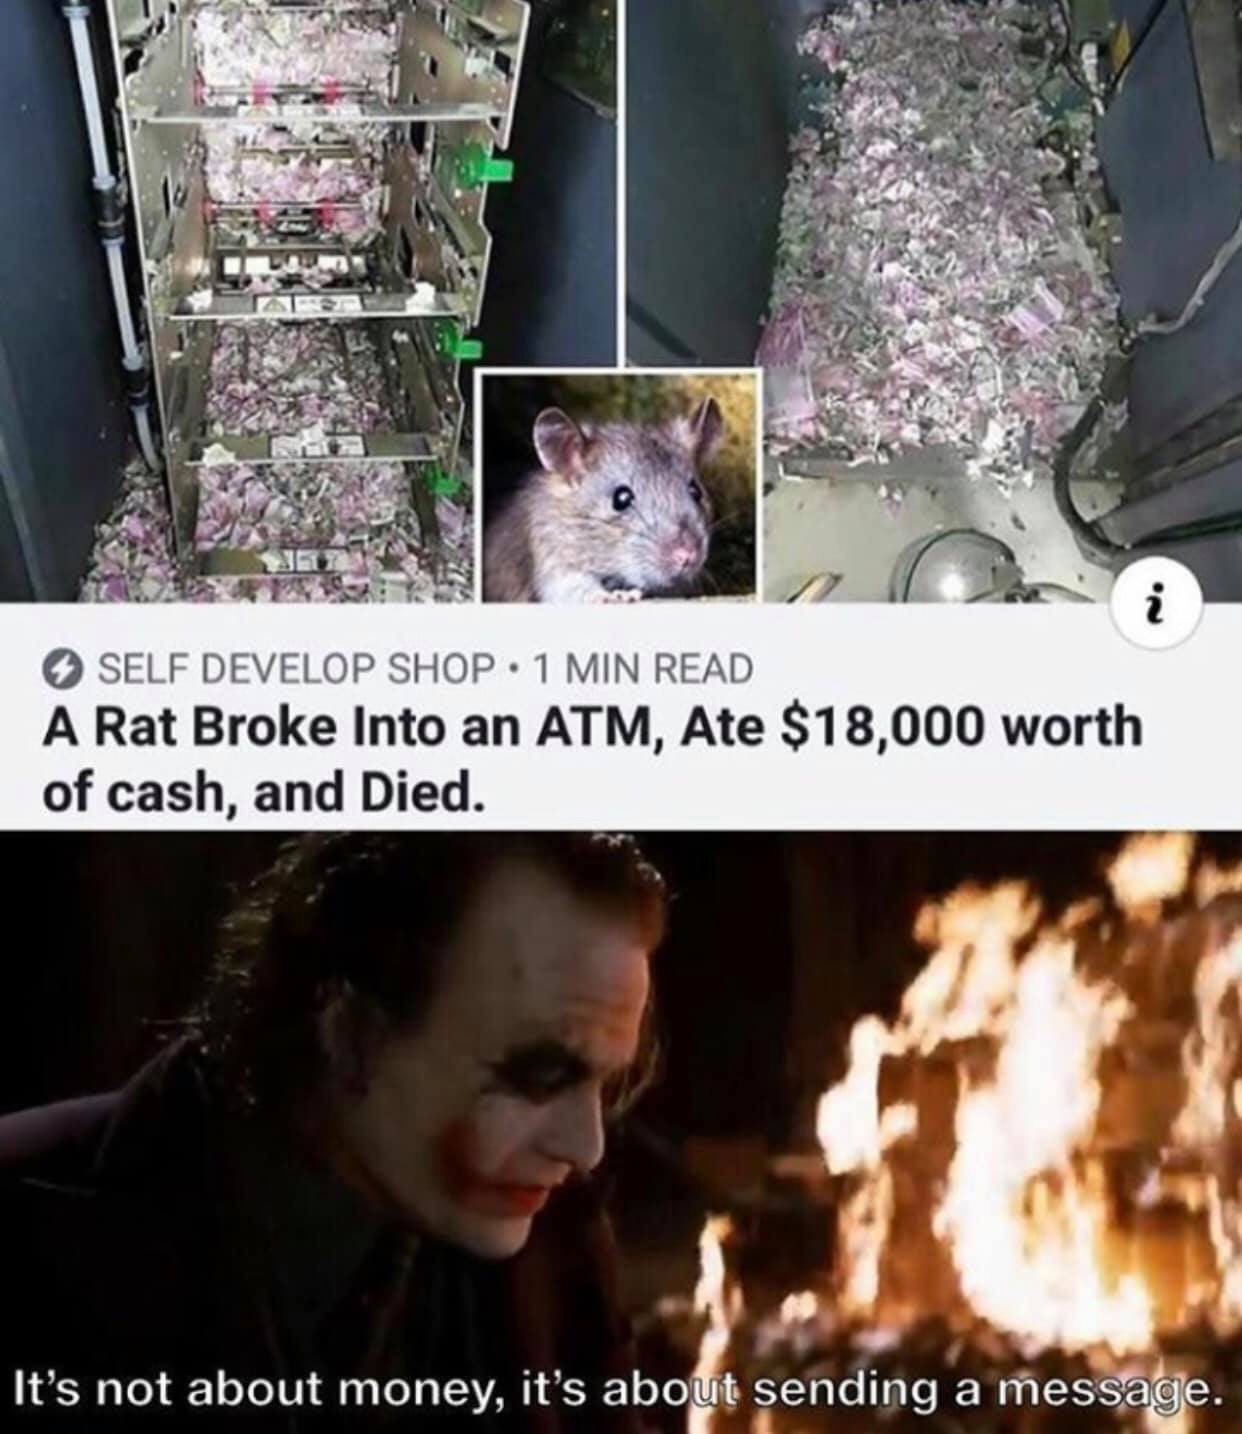 rat broke into atm - Self Develop Shop 1 Min Read A Rat Broke into an Atm, Ate $18,000 worth of cash, and Died. It's not about money, it's about sending a message.